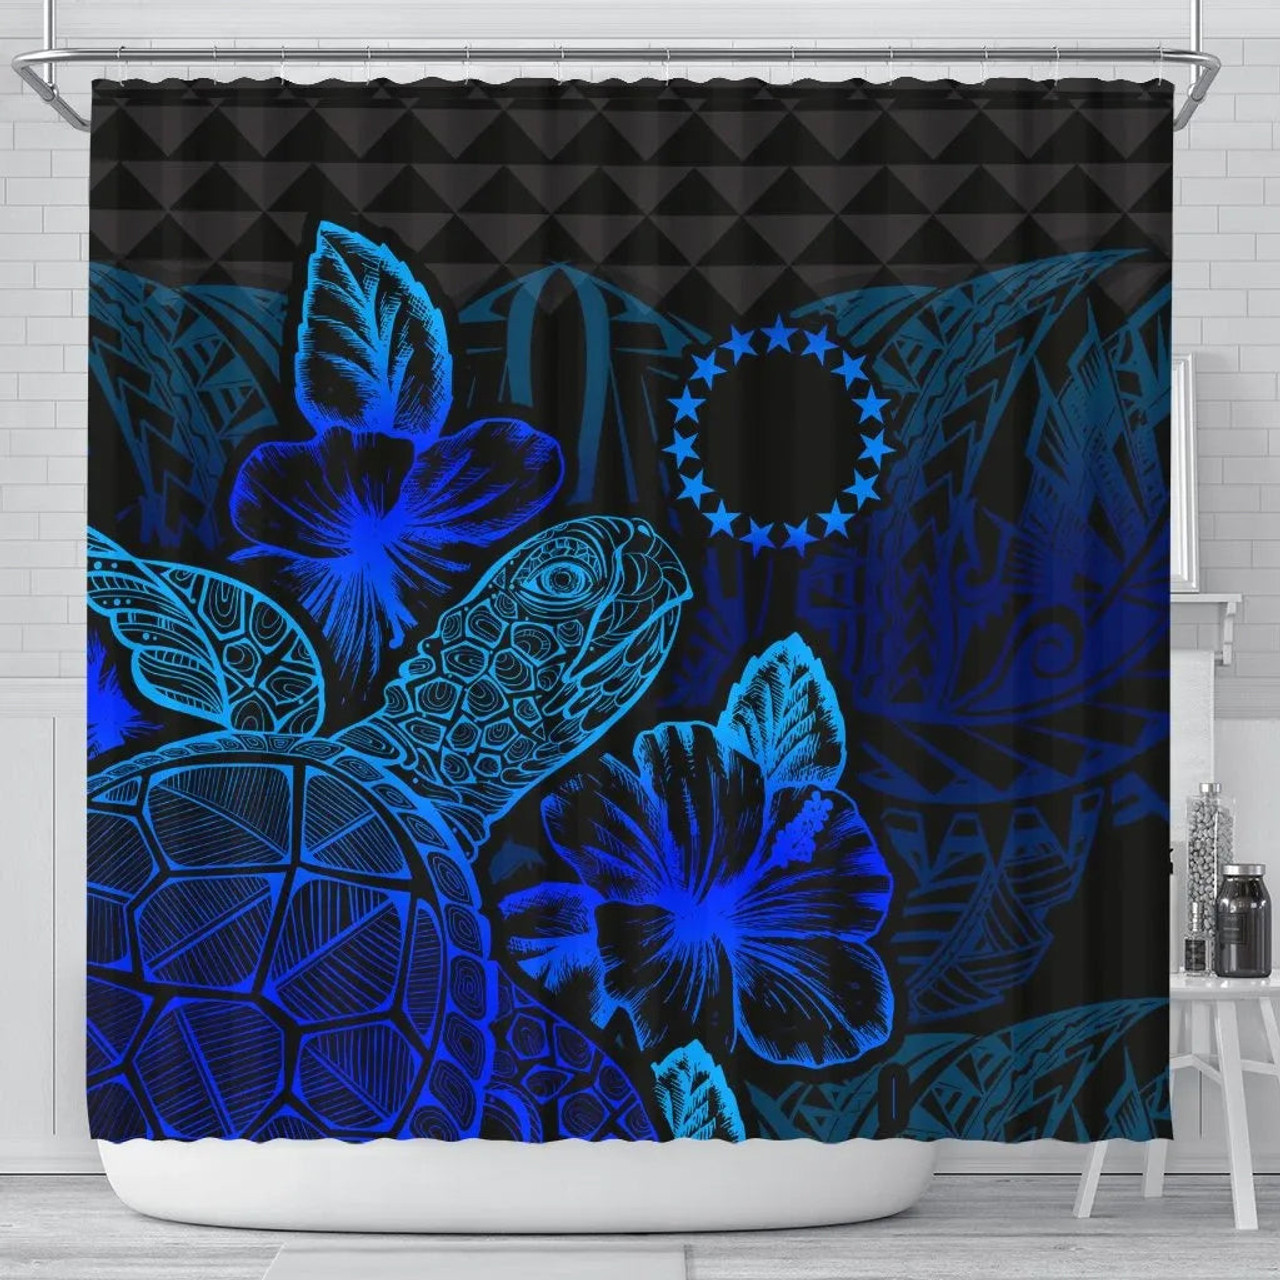 Cook Islands Shower Curtain Turtle Hibiscus Blue 1